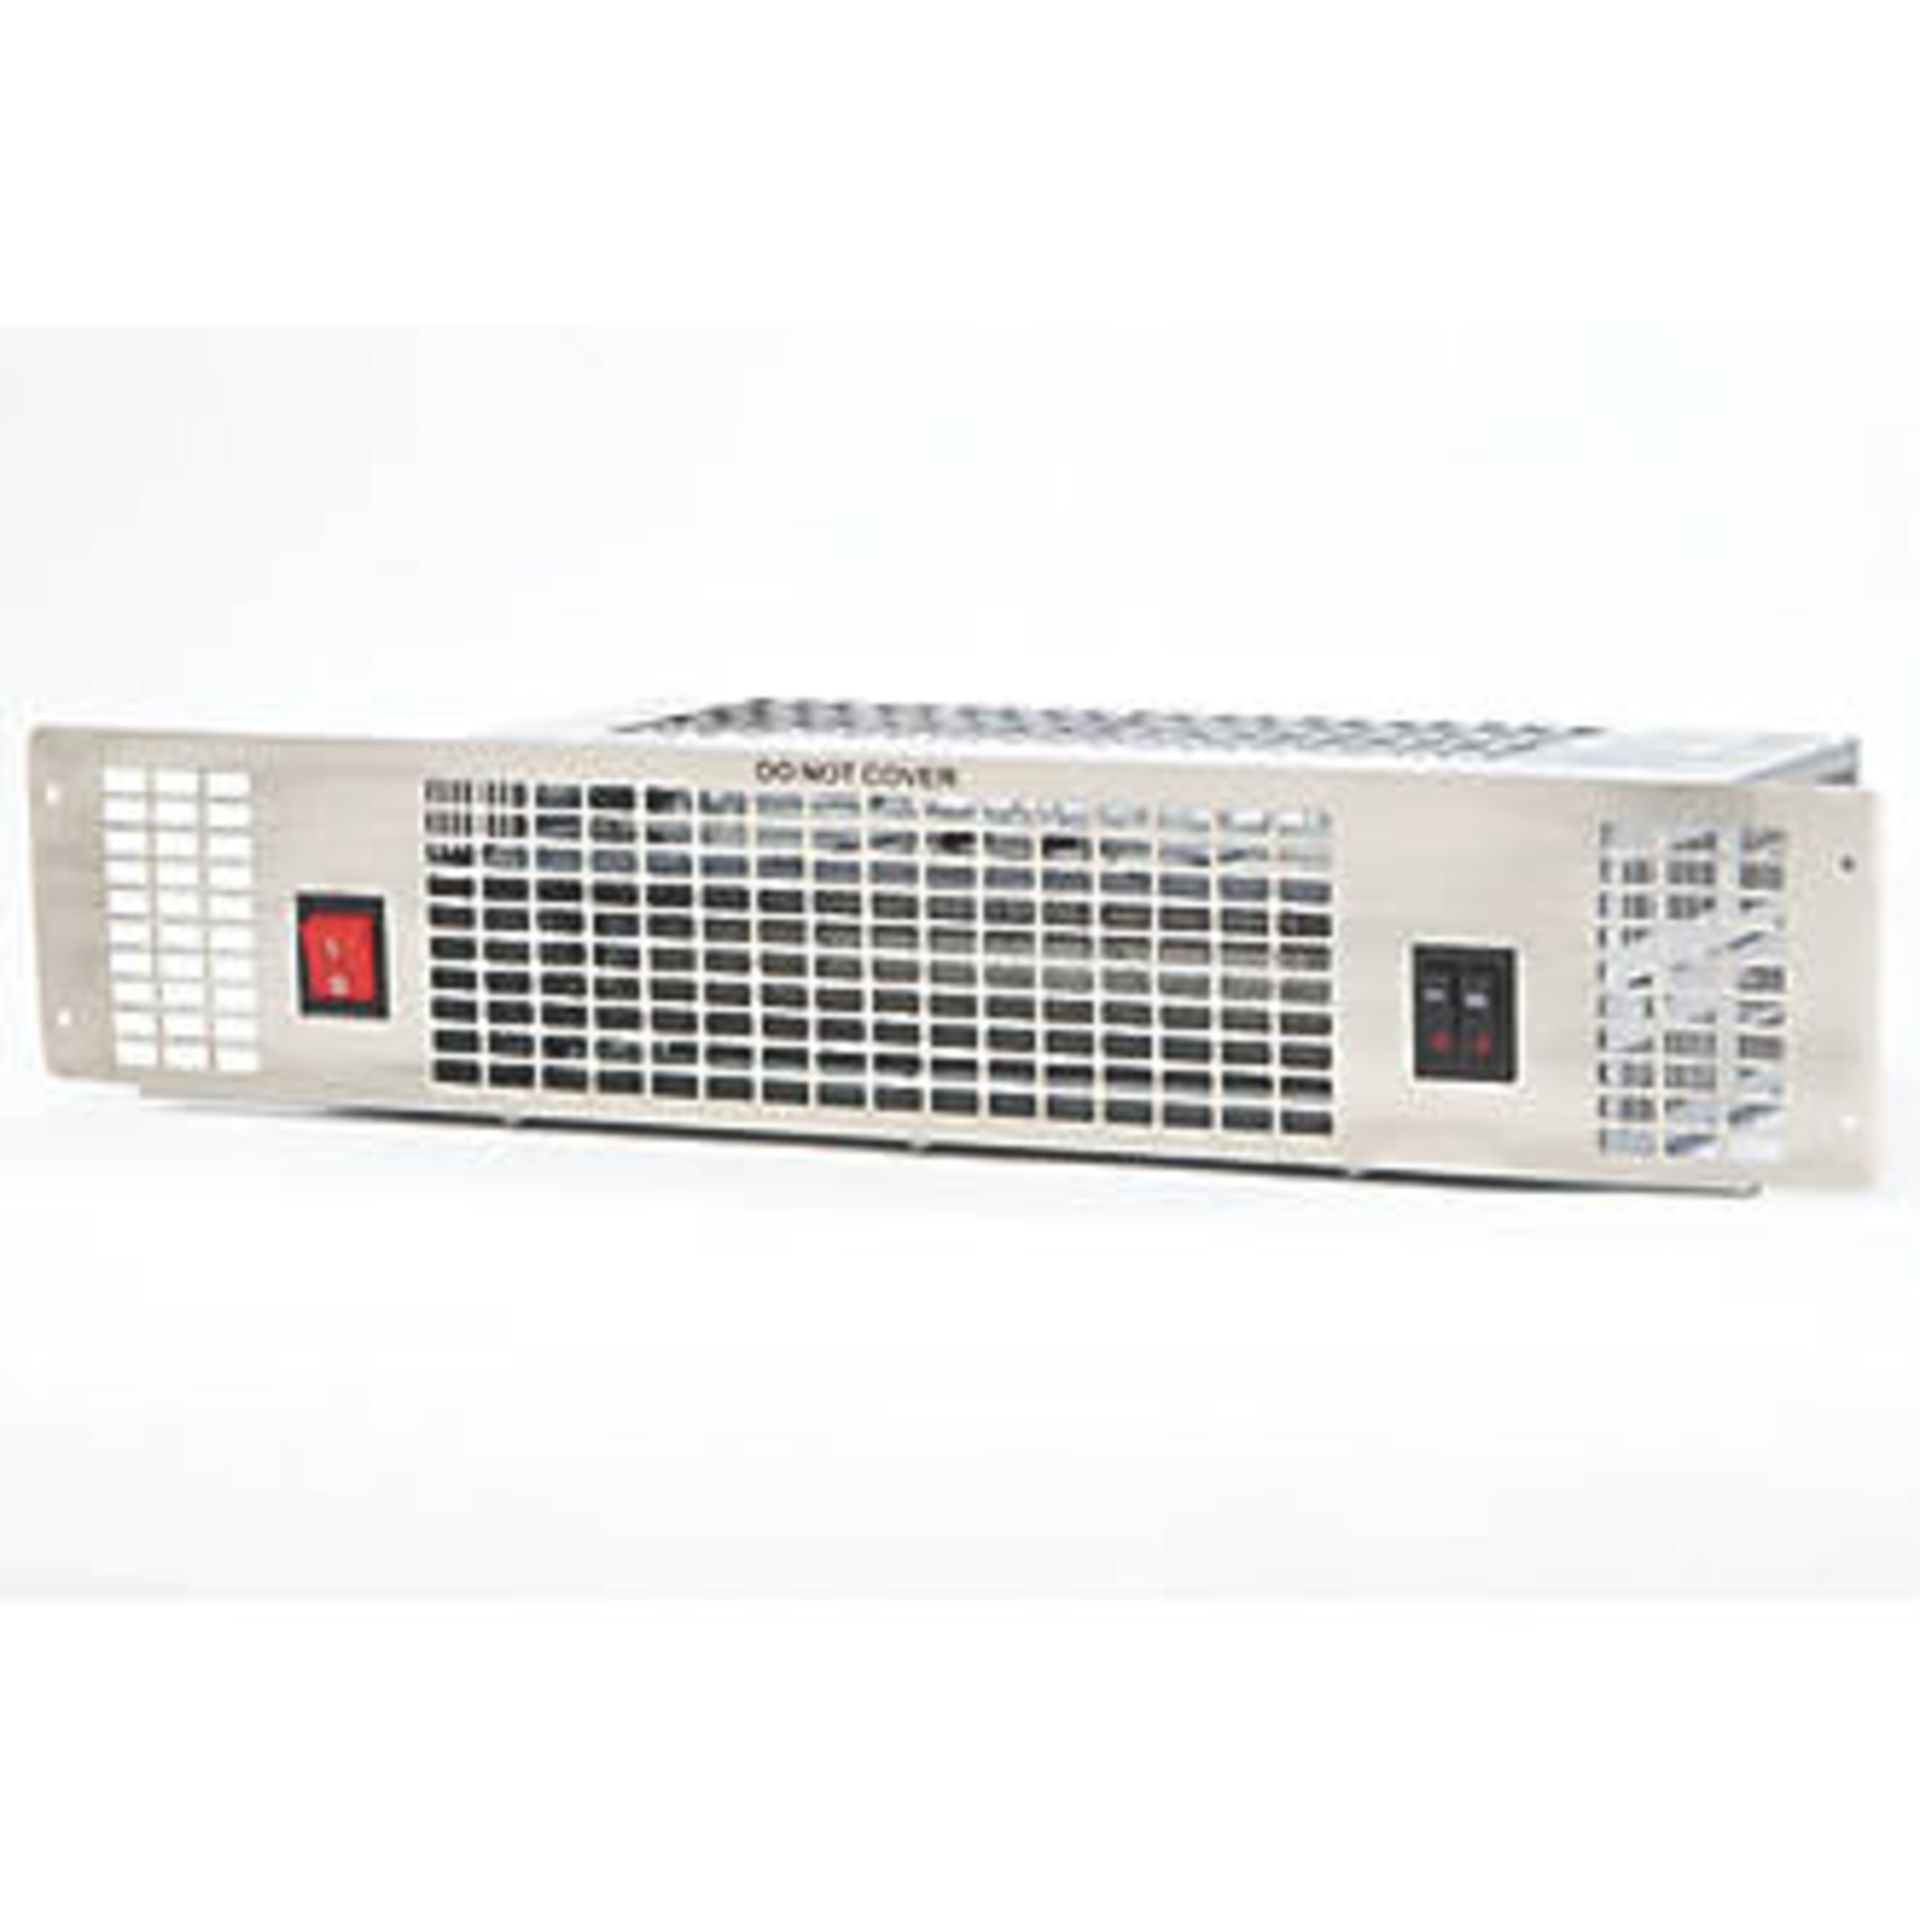 1x TCP UPH201SS PLINTH-MOUNTED FAN HEATER SILVER 2000W 500 X 100MM, new and boxed, Economic,